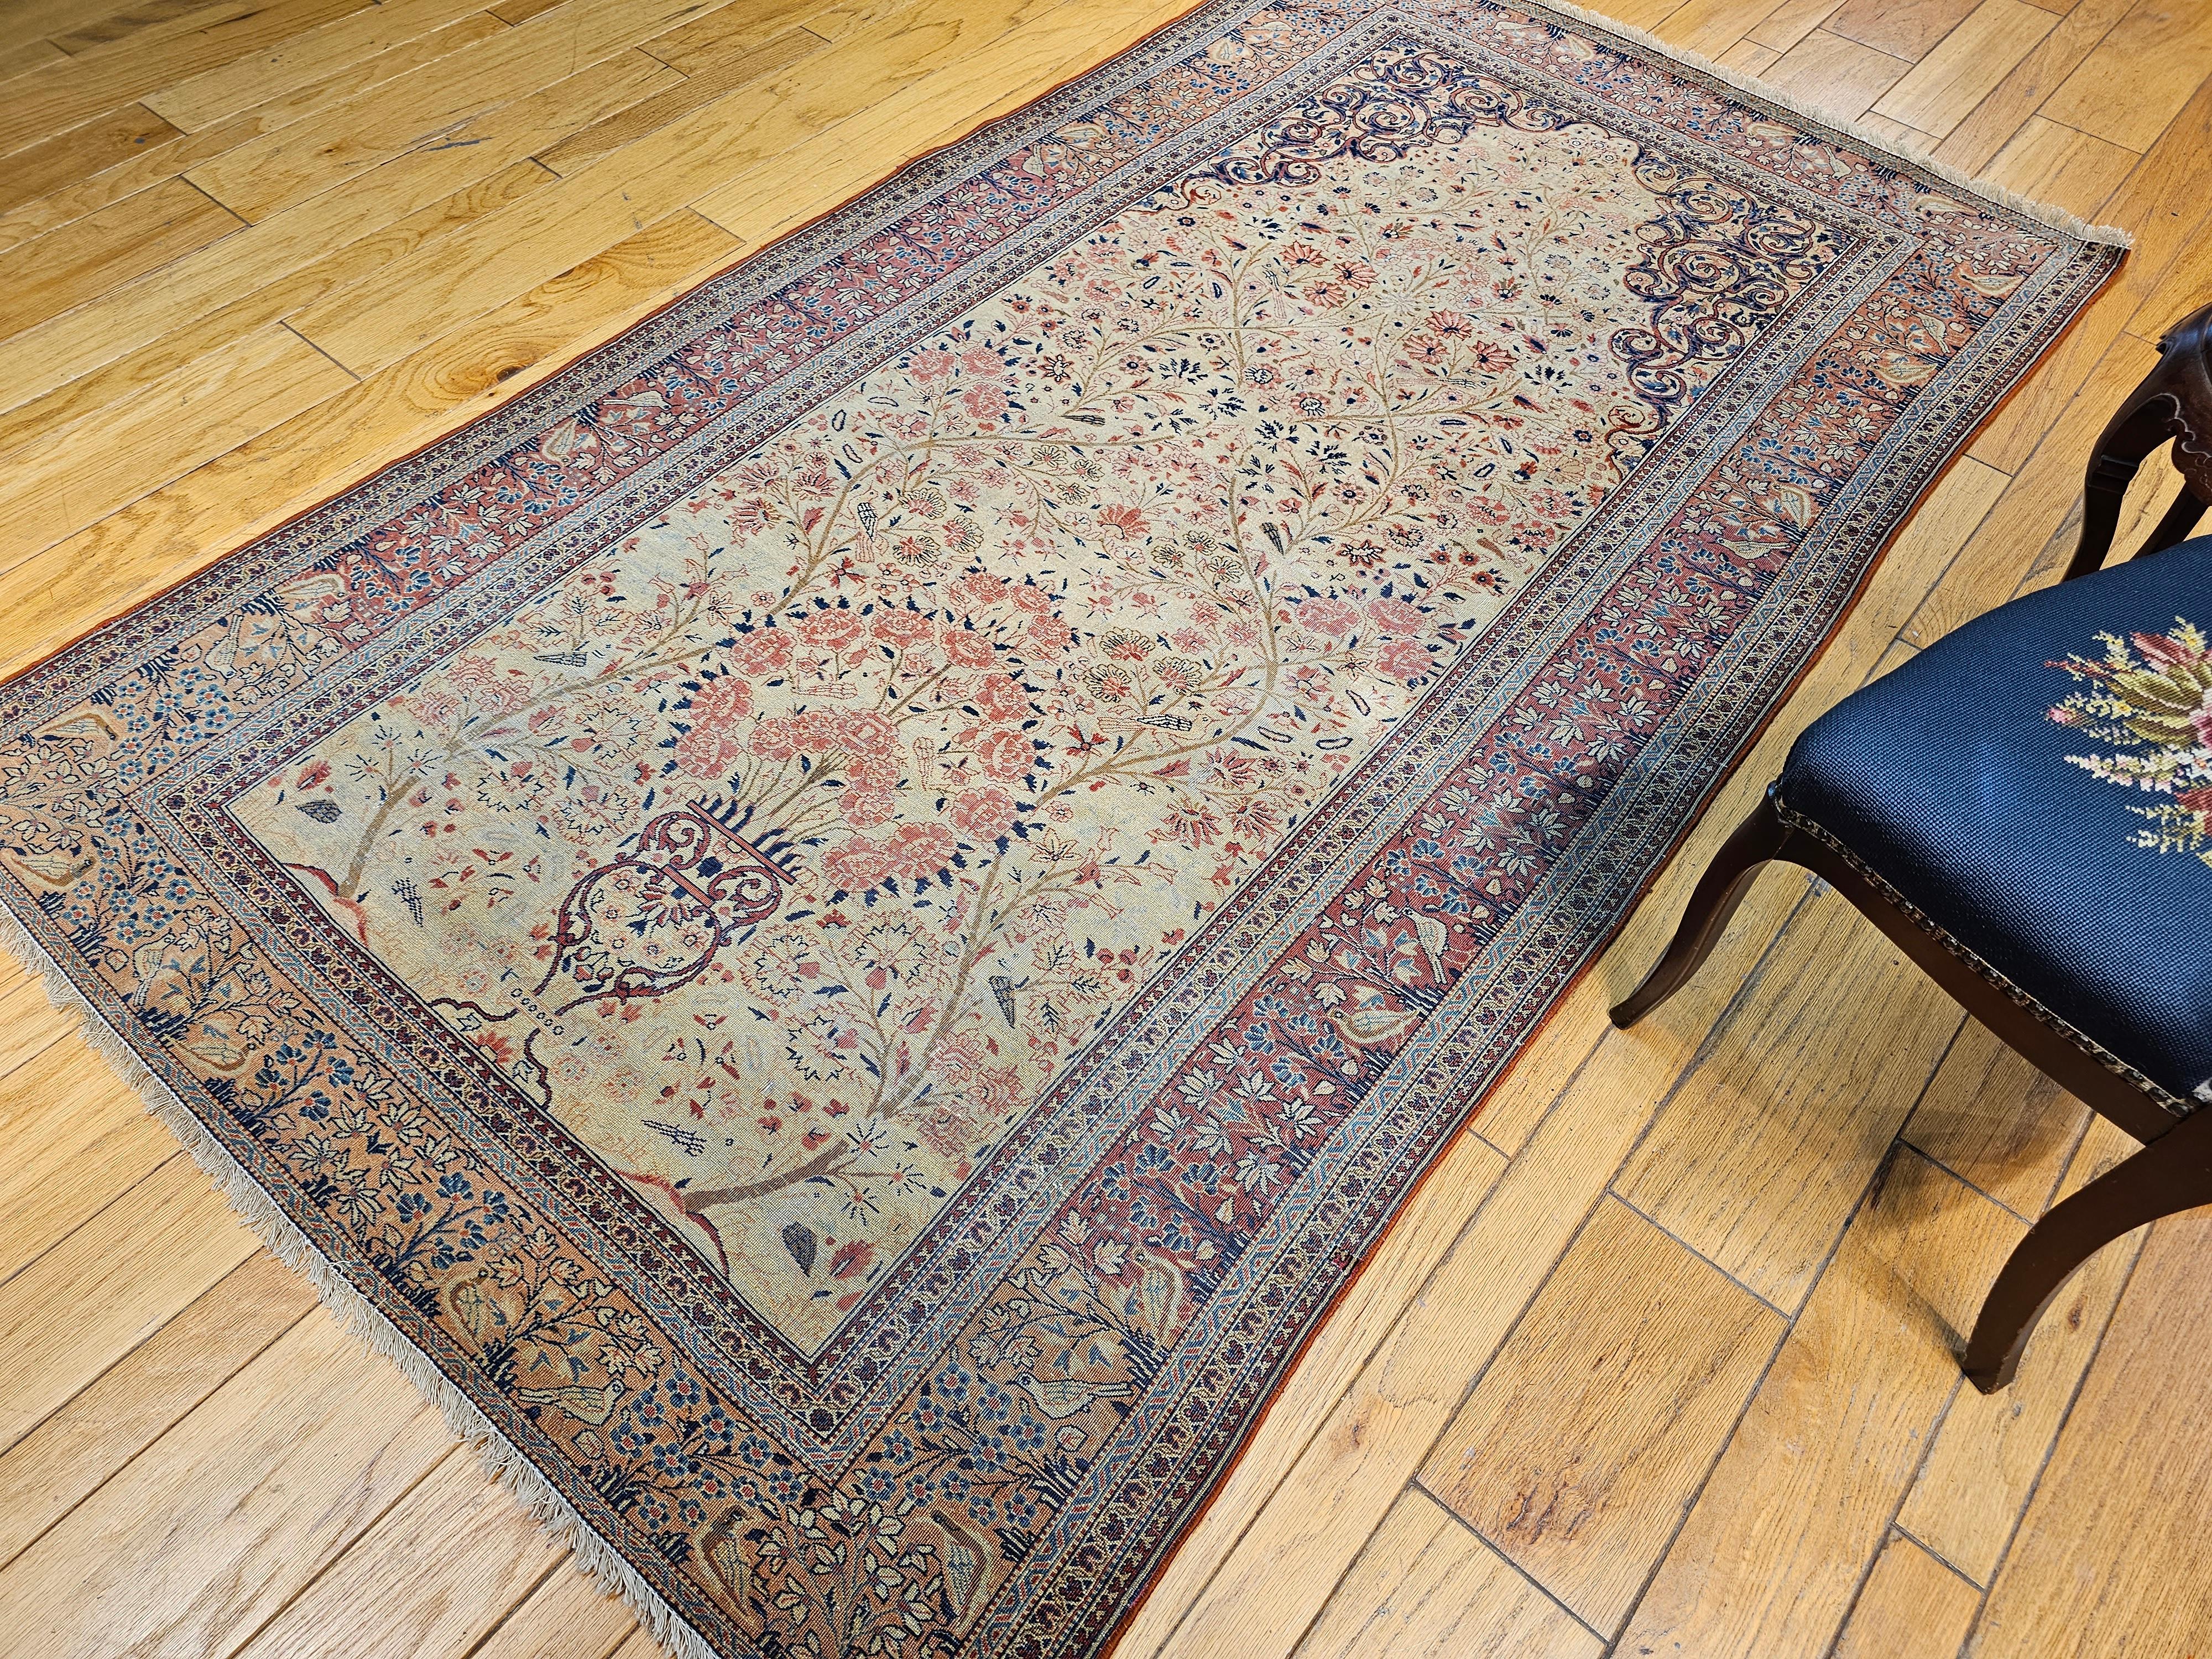 19th Century Persian Kashan Vase “Tree of Life” Rug in Ivory, Brick Red, Navy For Sale 13